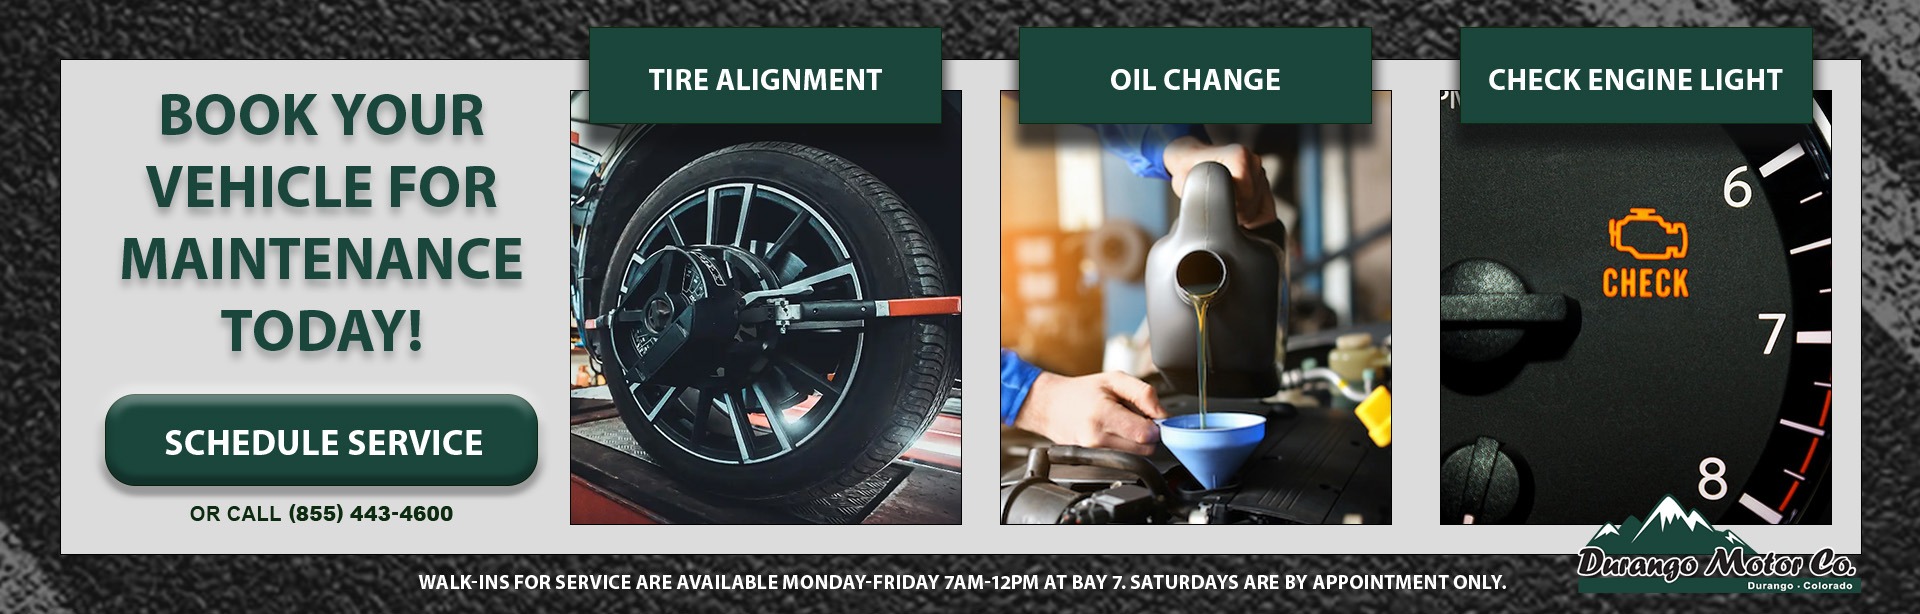 Book your vehicle for maintenance today